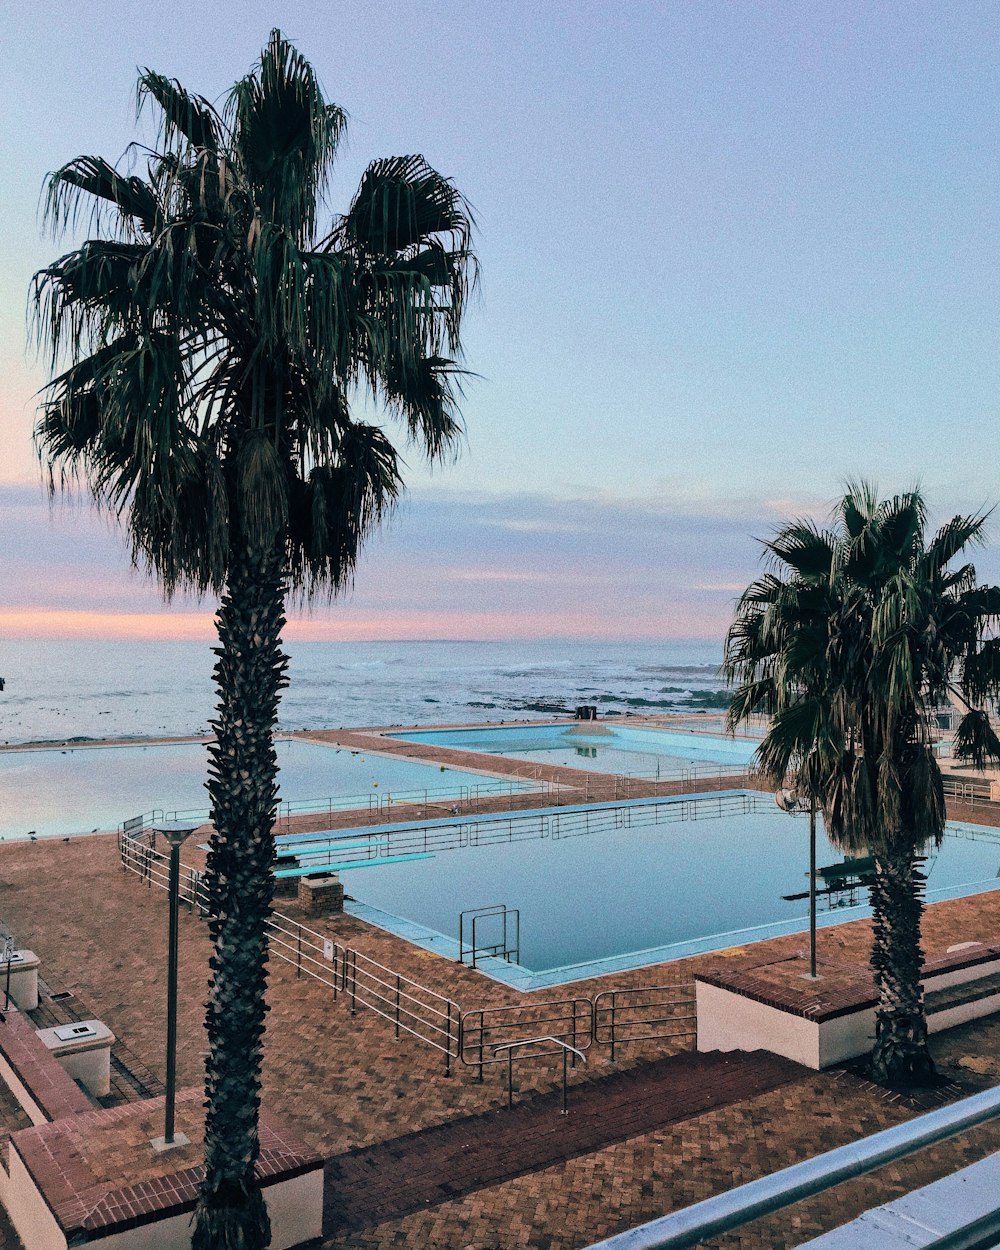 a large swimming pool next to a beach with palm trees